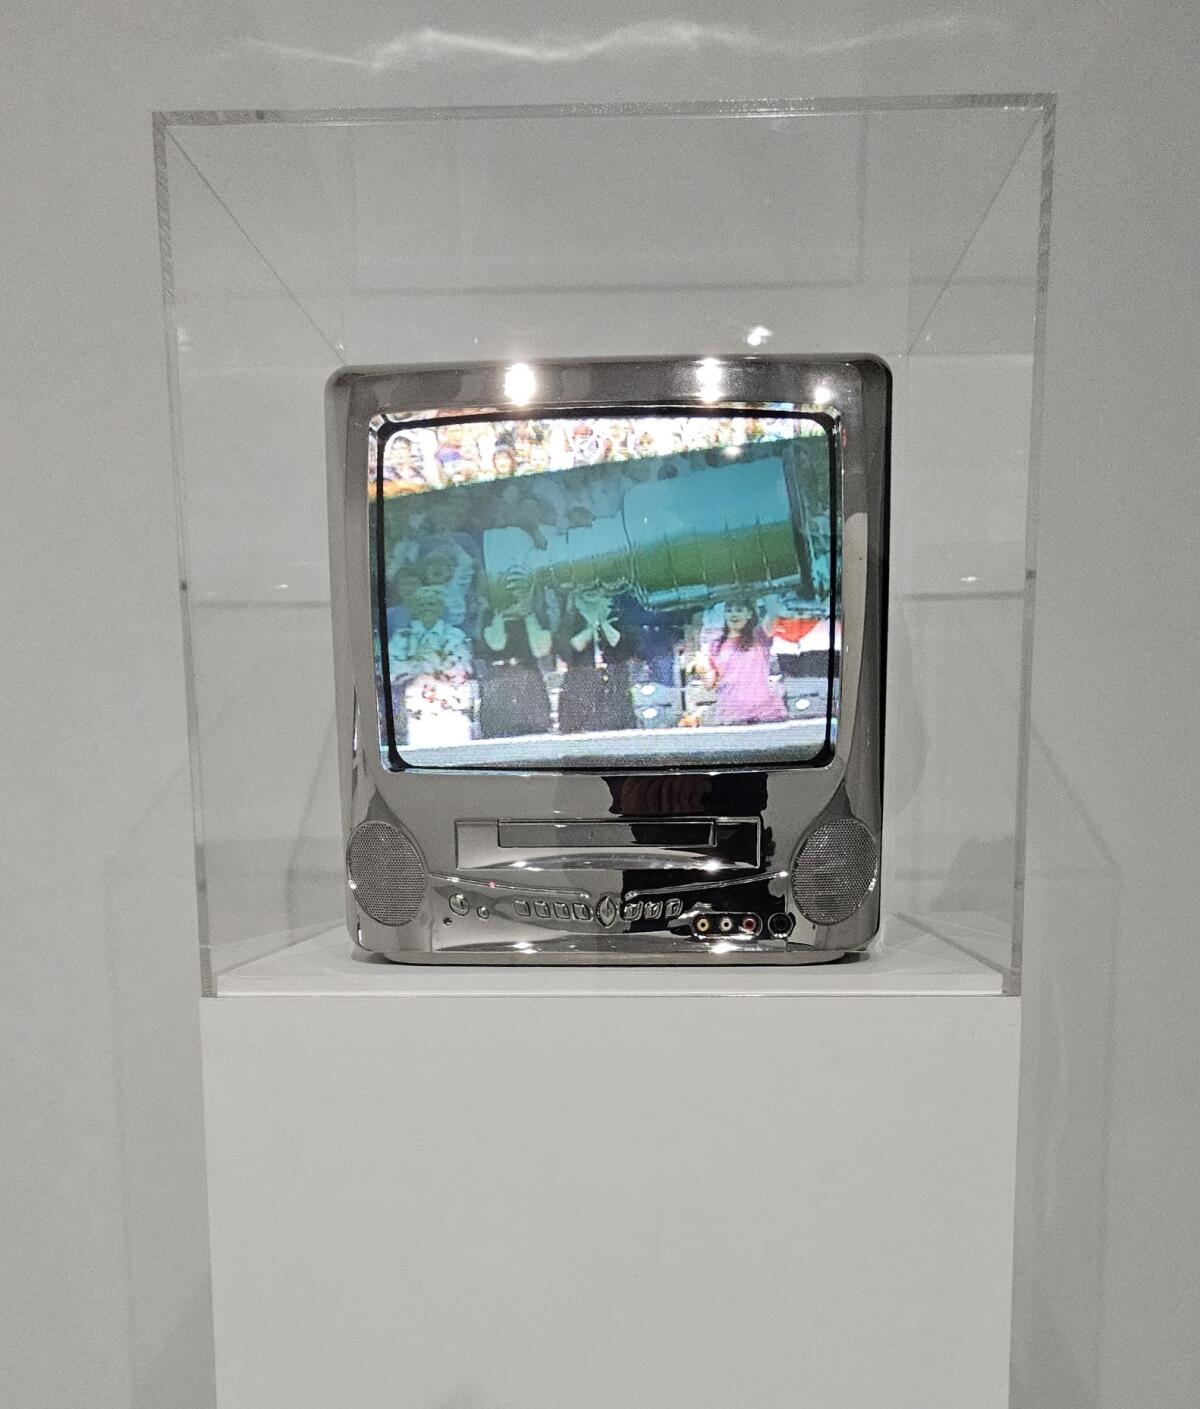 A small chrome-plated television on a pedestal, in a Plexiglass box.